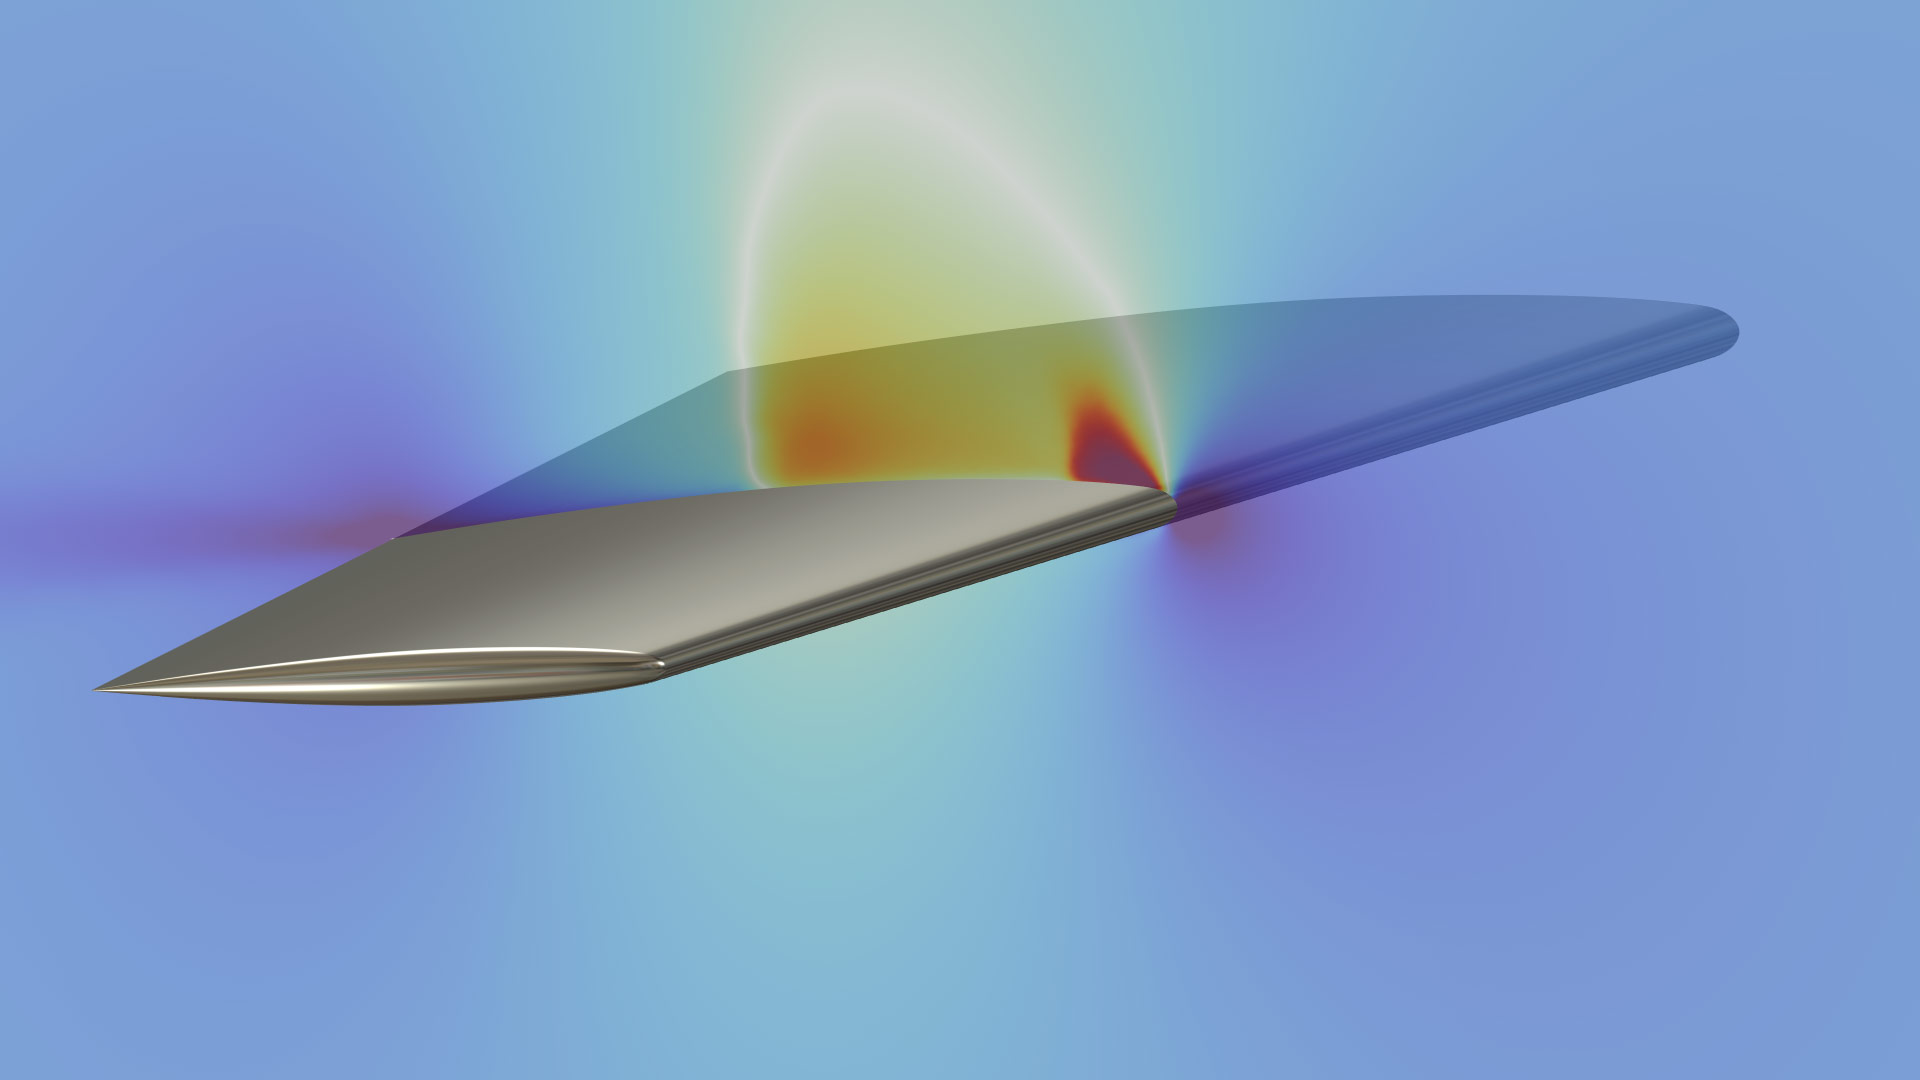 A wing model showing the Mach number distribution in the Rainbow Light color table.